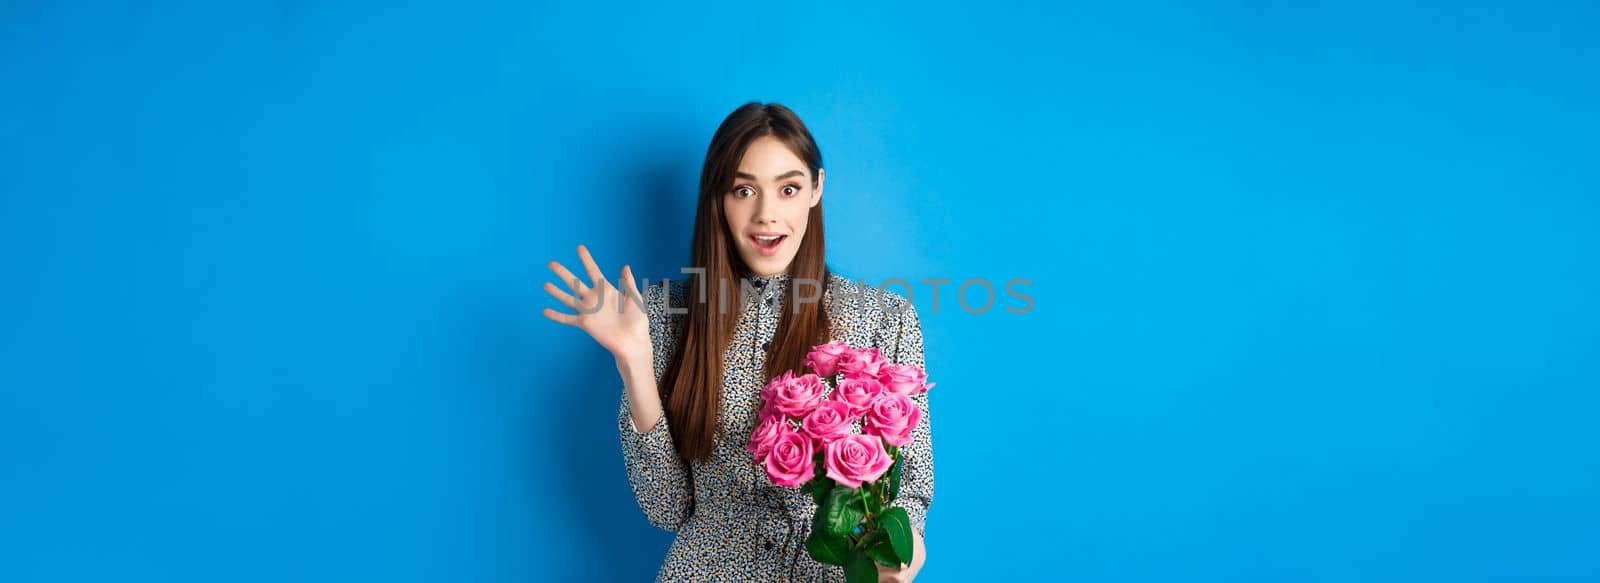 Valentines day concept. Surprised pretty girl holding bouquet of flowers from lover, looking amazed and happy at camera, standing on blue background.